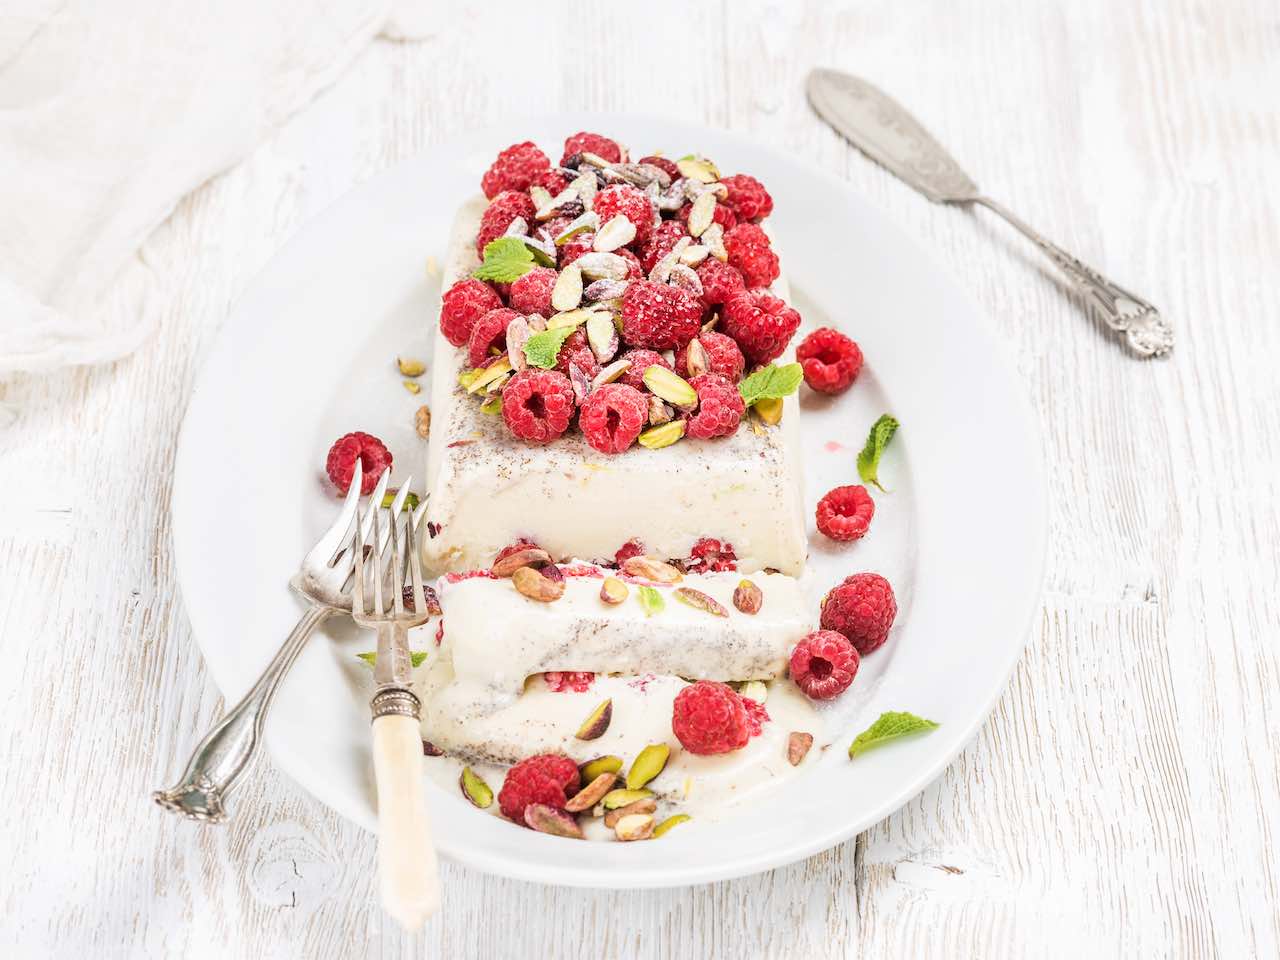 Raspberry recipes: Homemade semifreddo with pistachio and raspberry in oval dish over old white painted wooden background, selective focus, horizontal composition